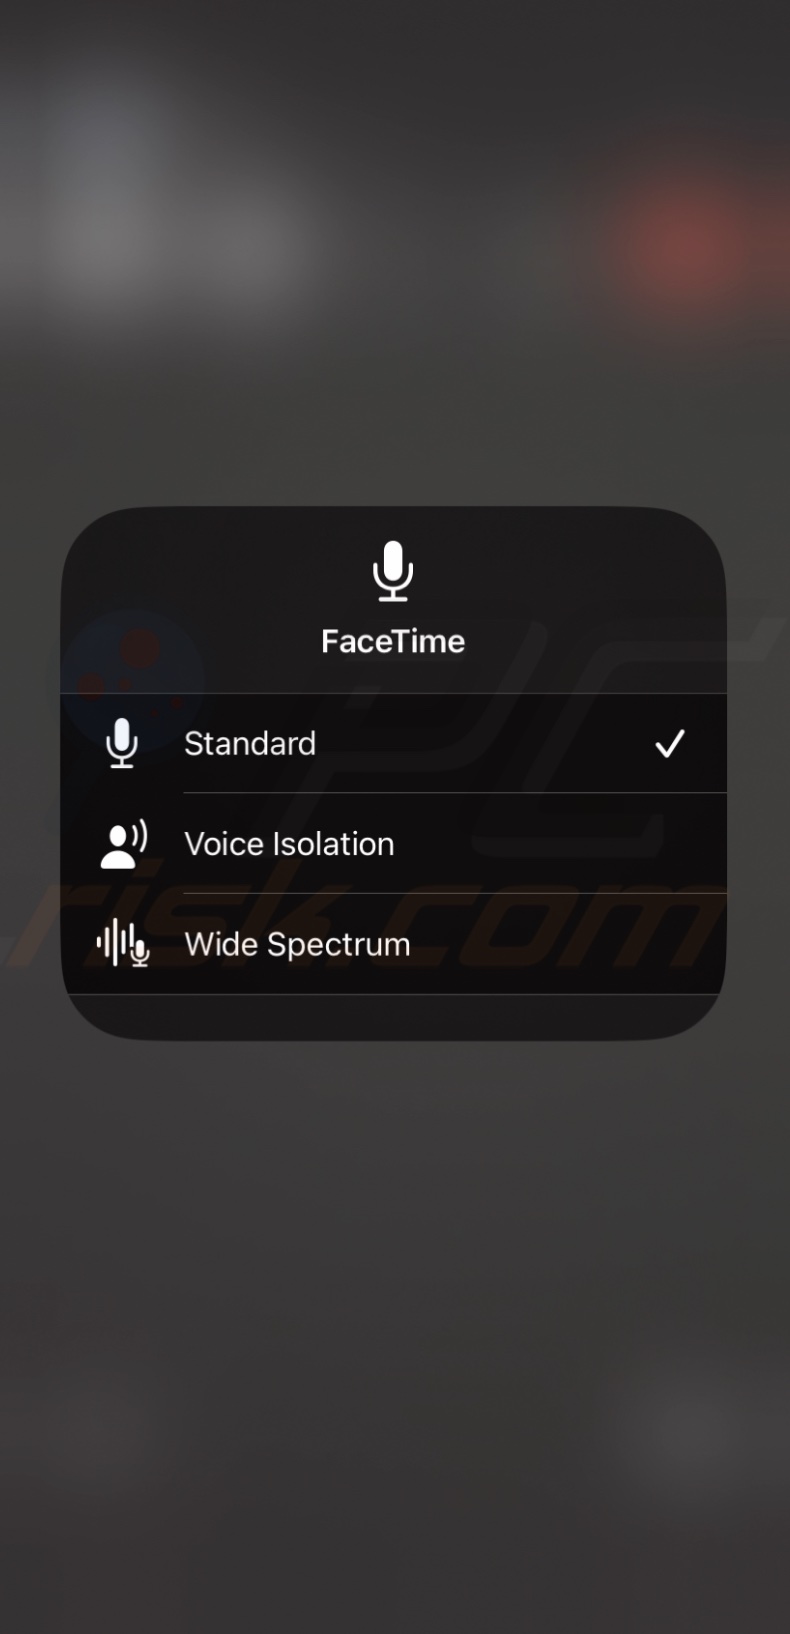 Disable Voice Isolation